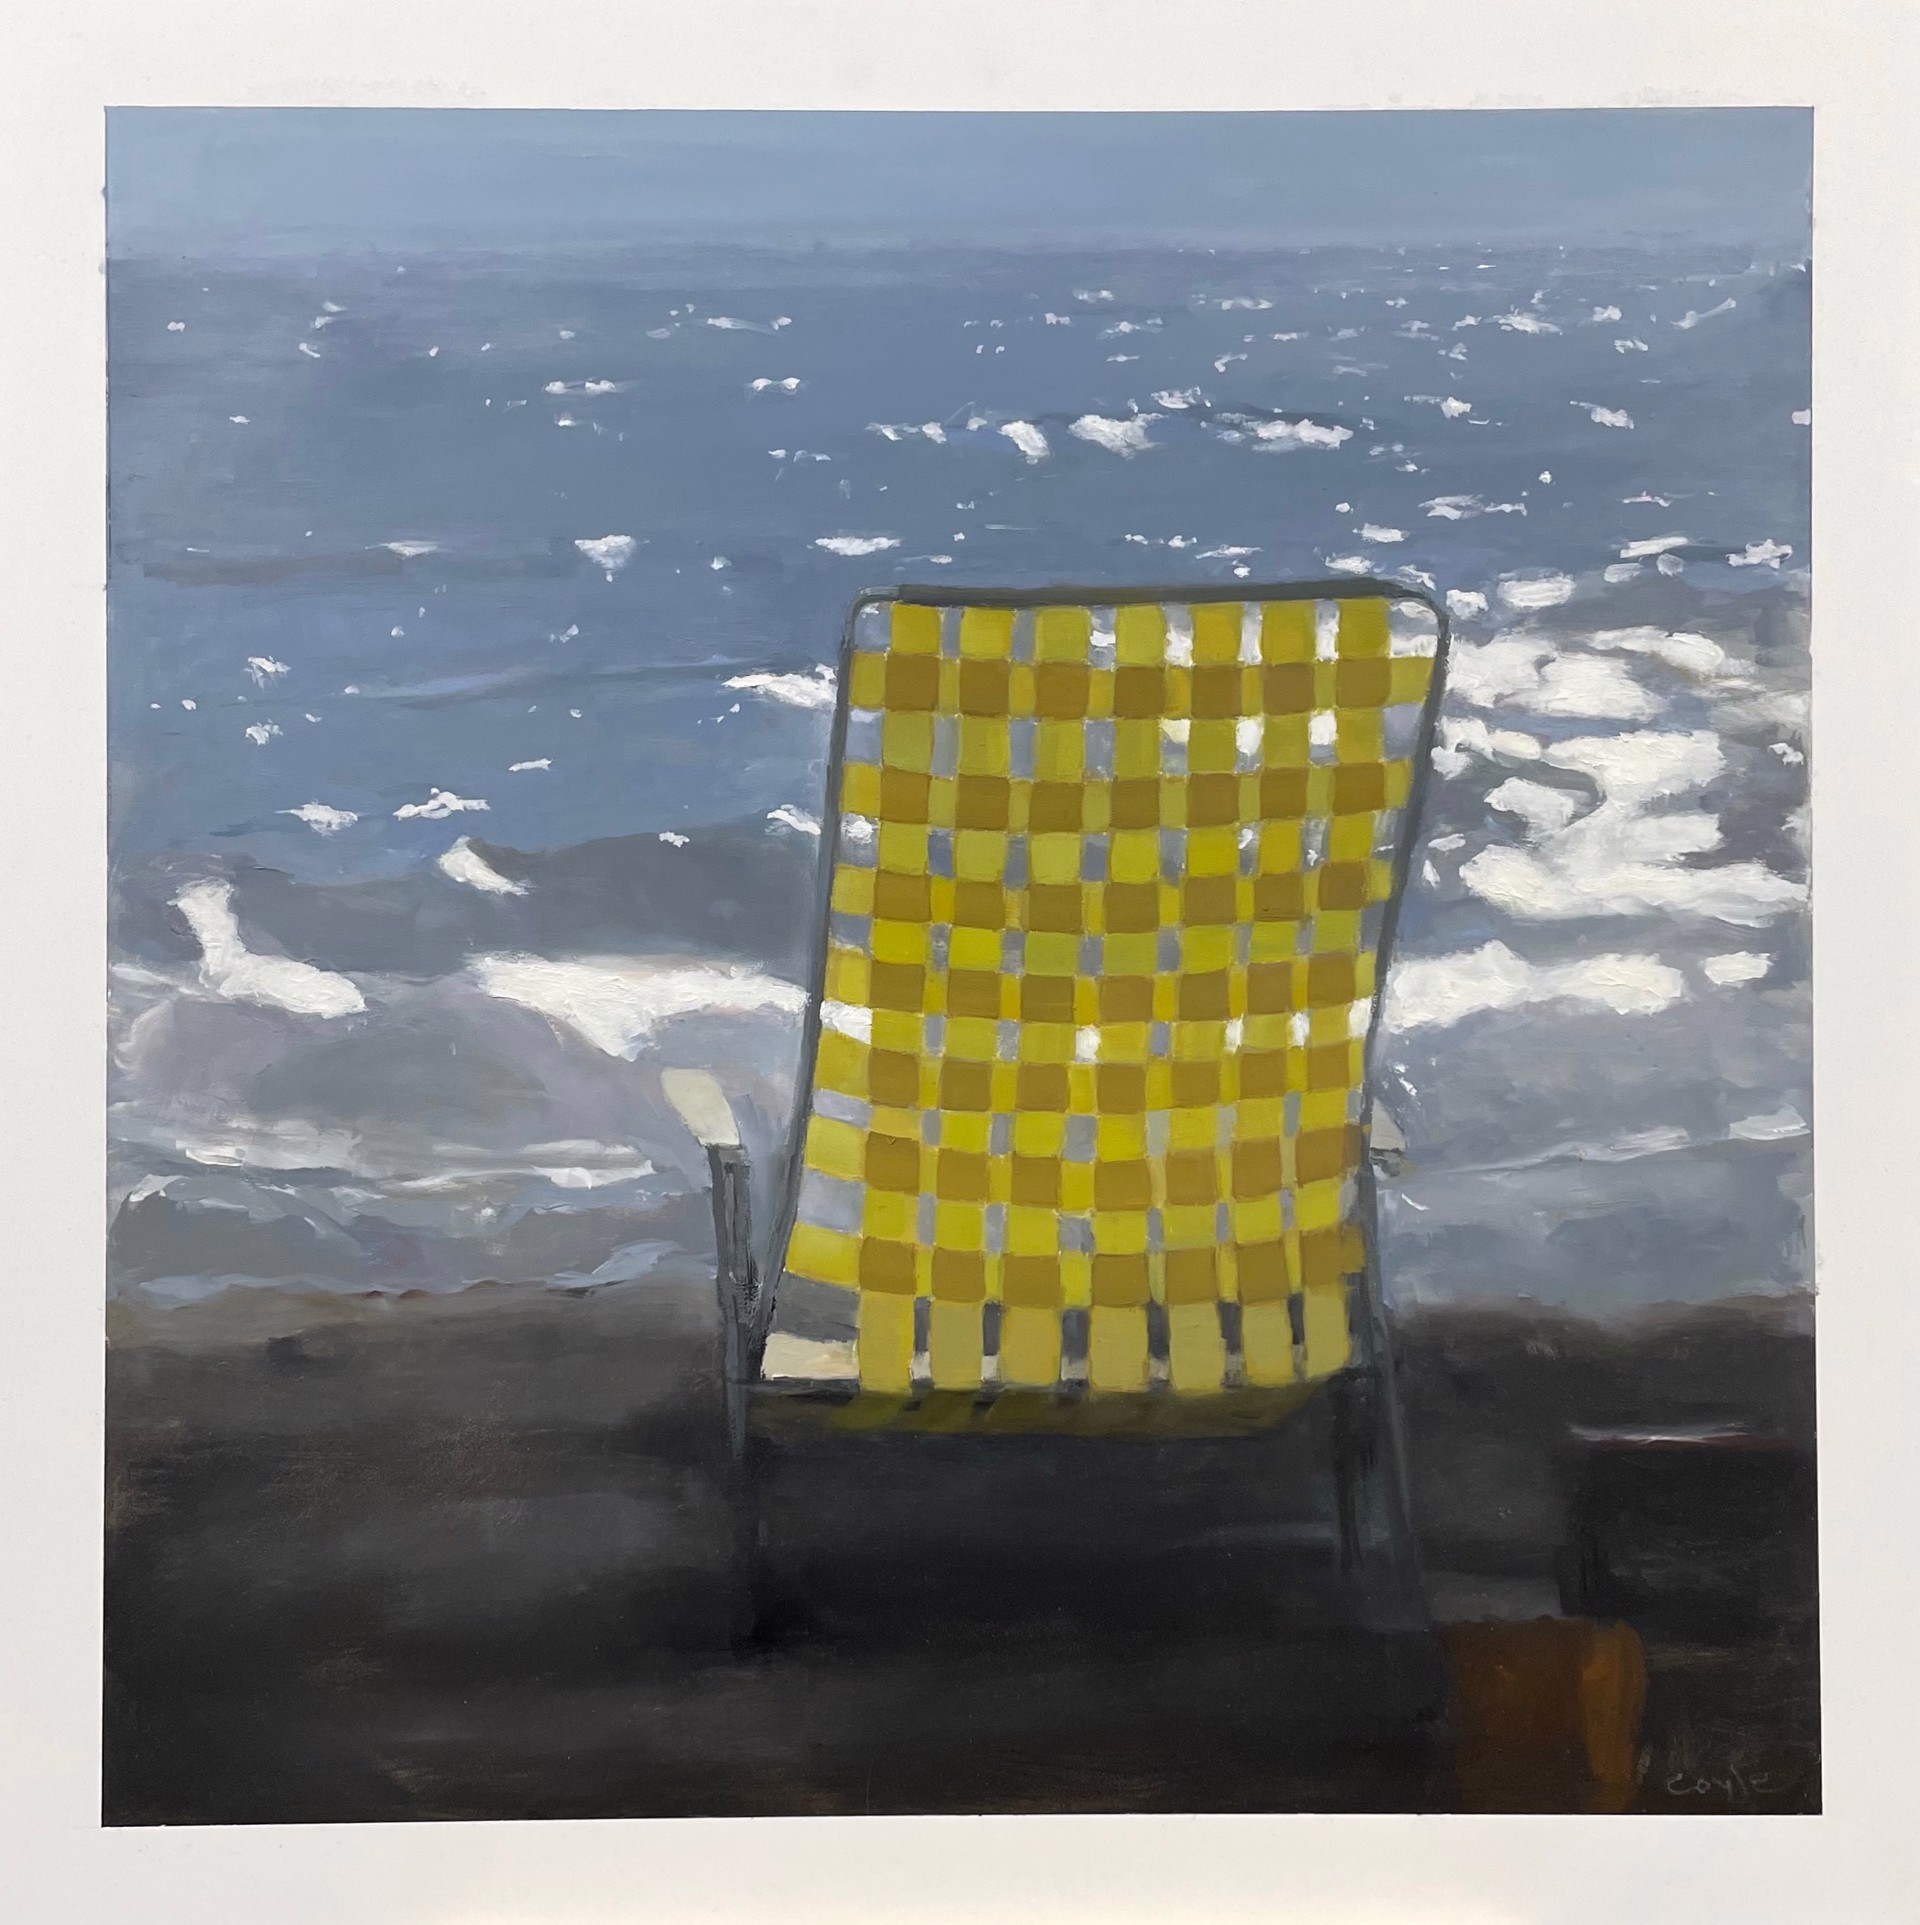 A Chair Sitting Empty Next to the Sea by Stephen Coyle